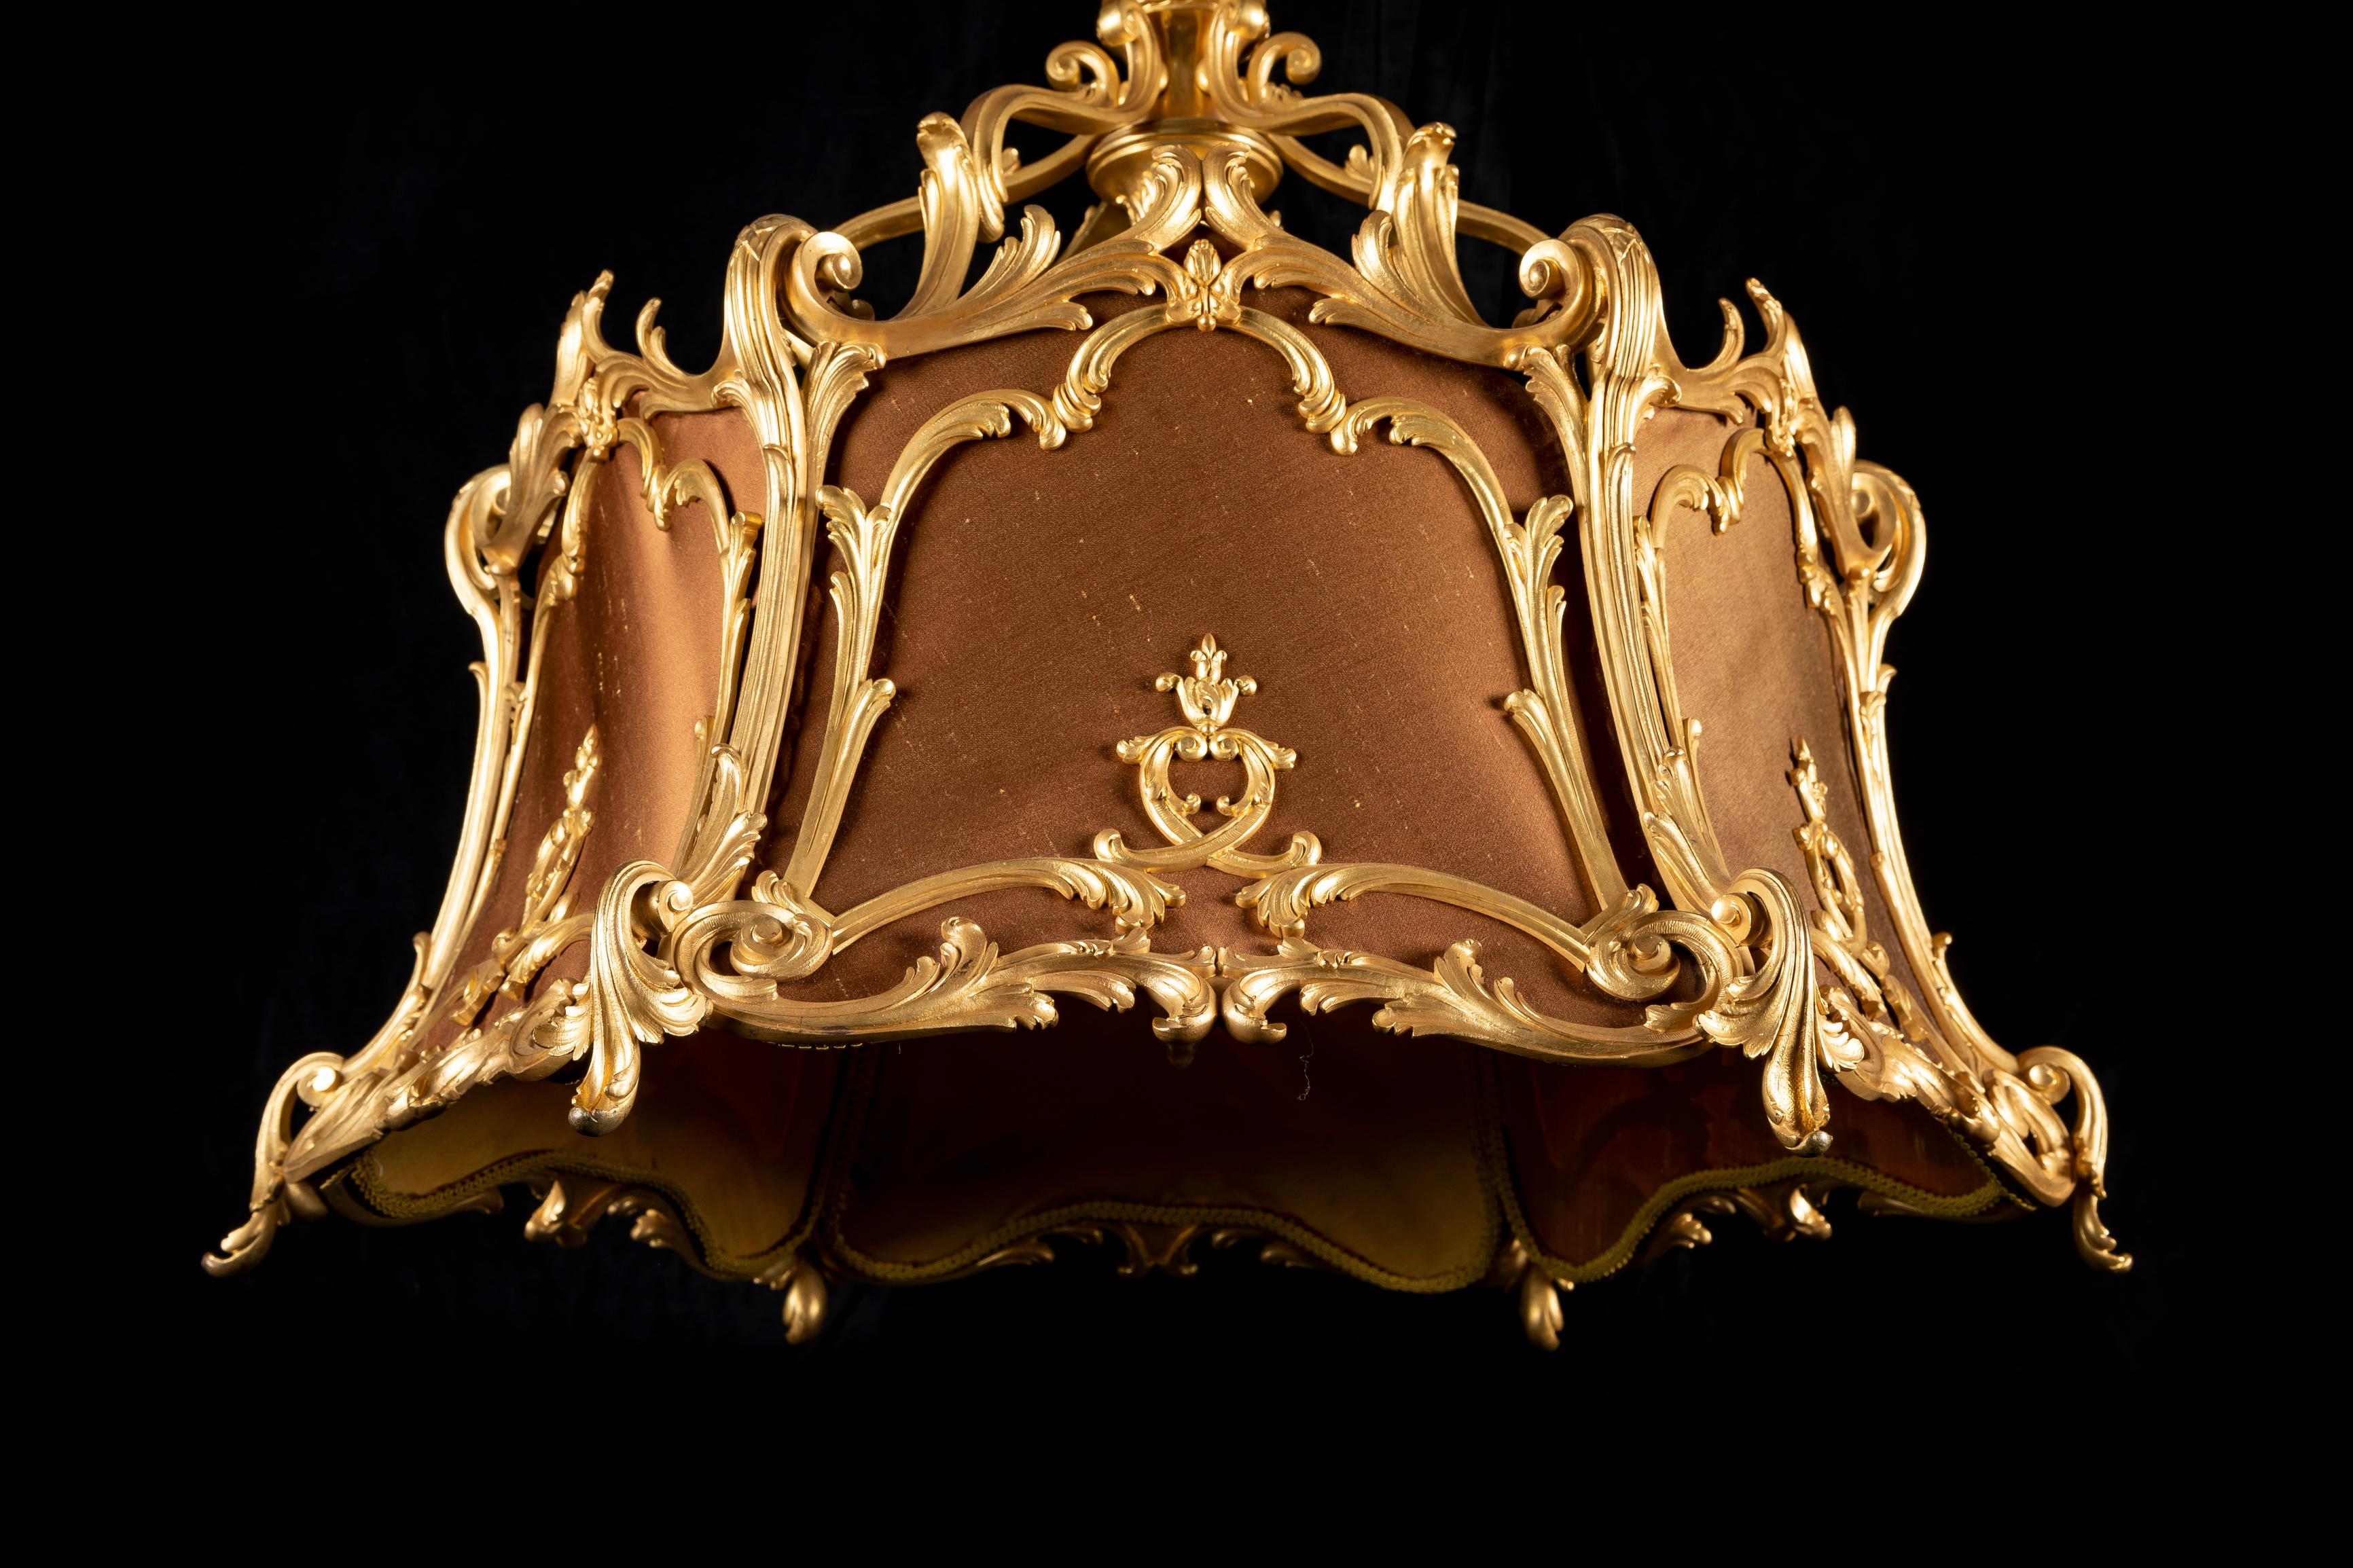 A Very unusual Antique French Louis XVI/ Art Nouveau Style gilt bronze and silk fabric multi light octagonal form chandelier of exquisite craftsmanship. This unique chandelier is of octagonal shape and constructed of six gilt bronze panels